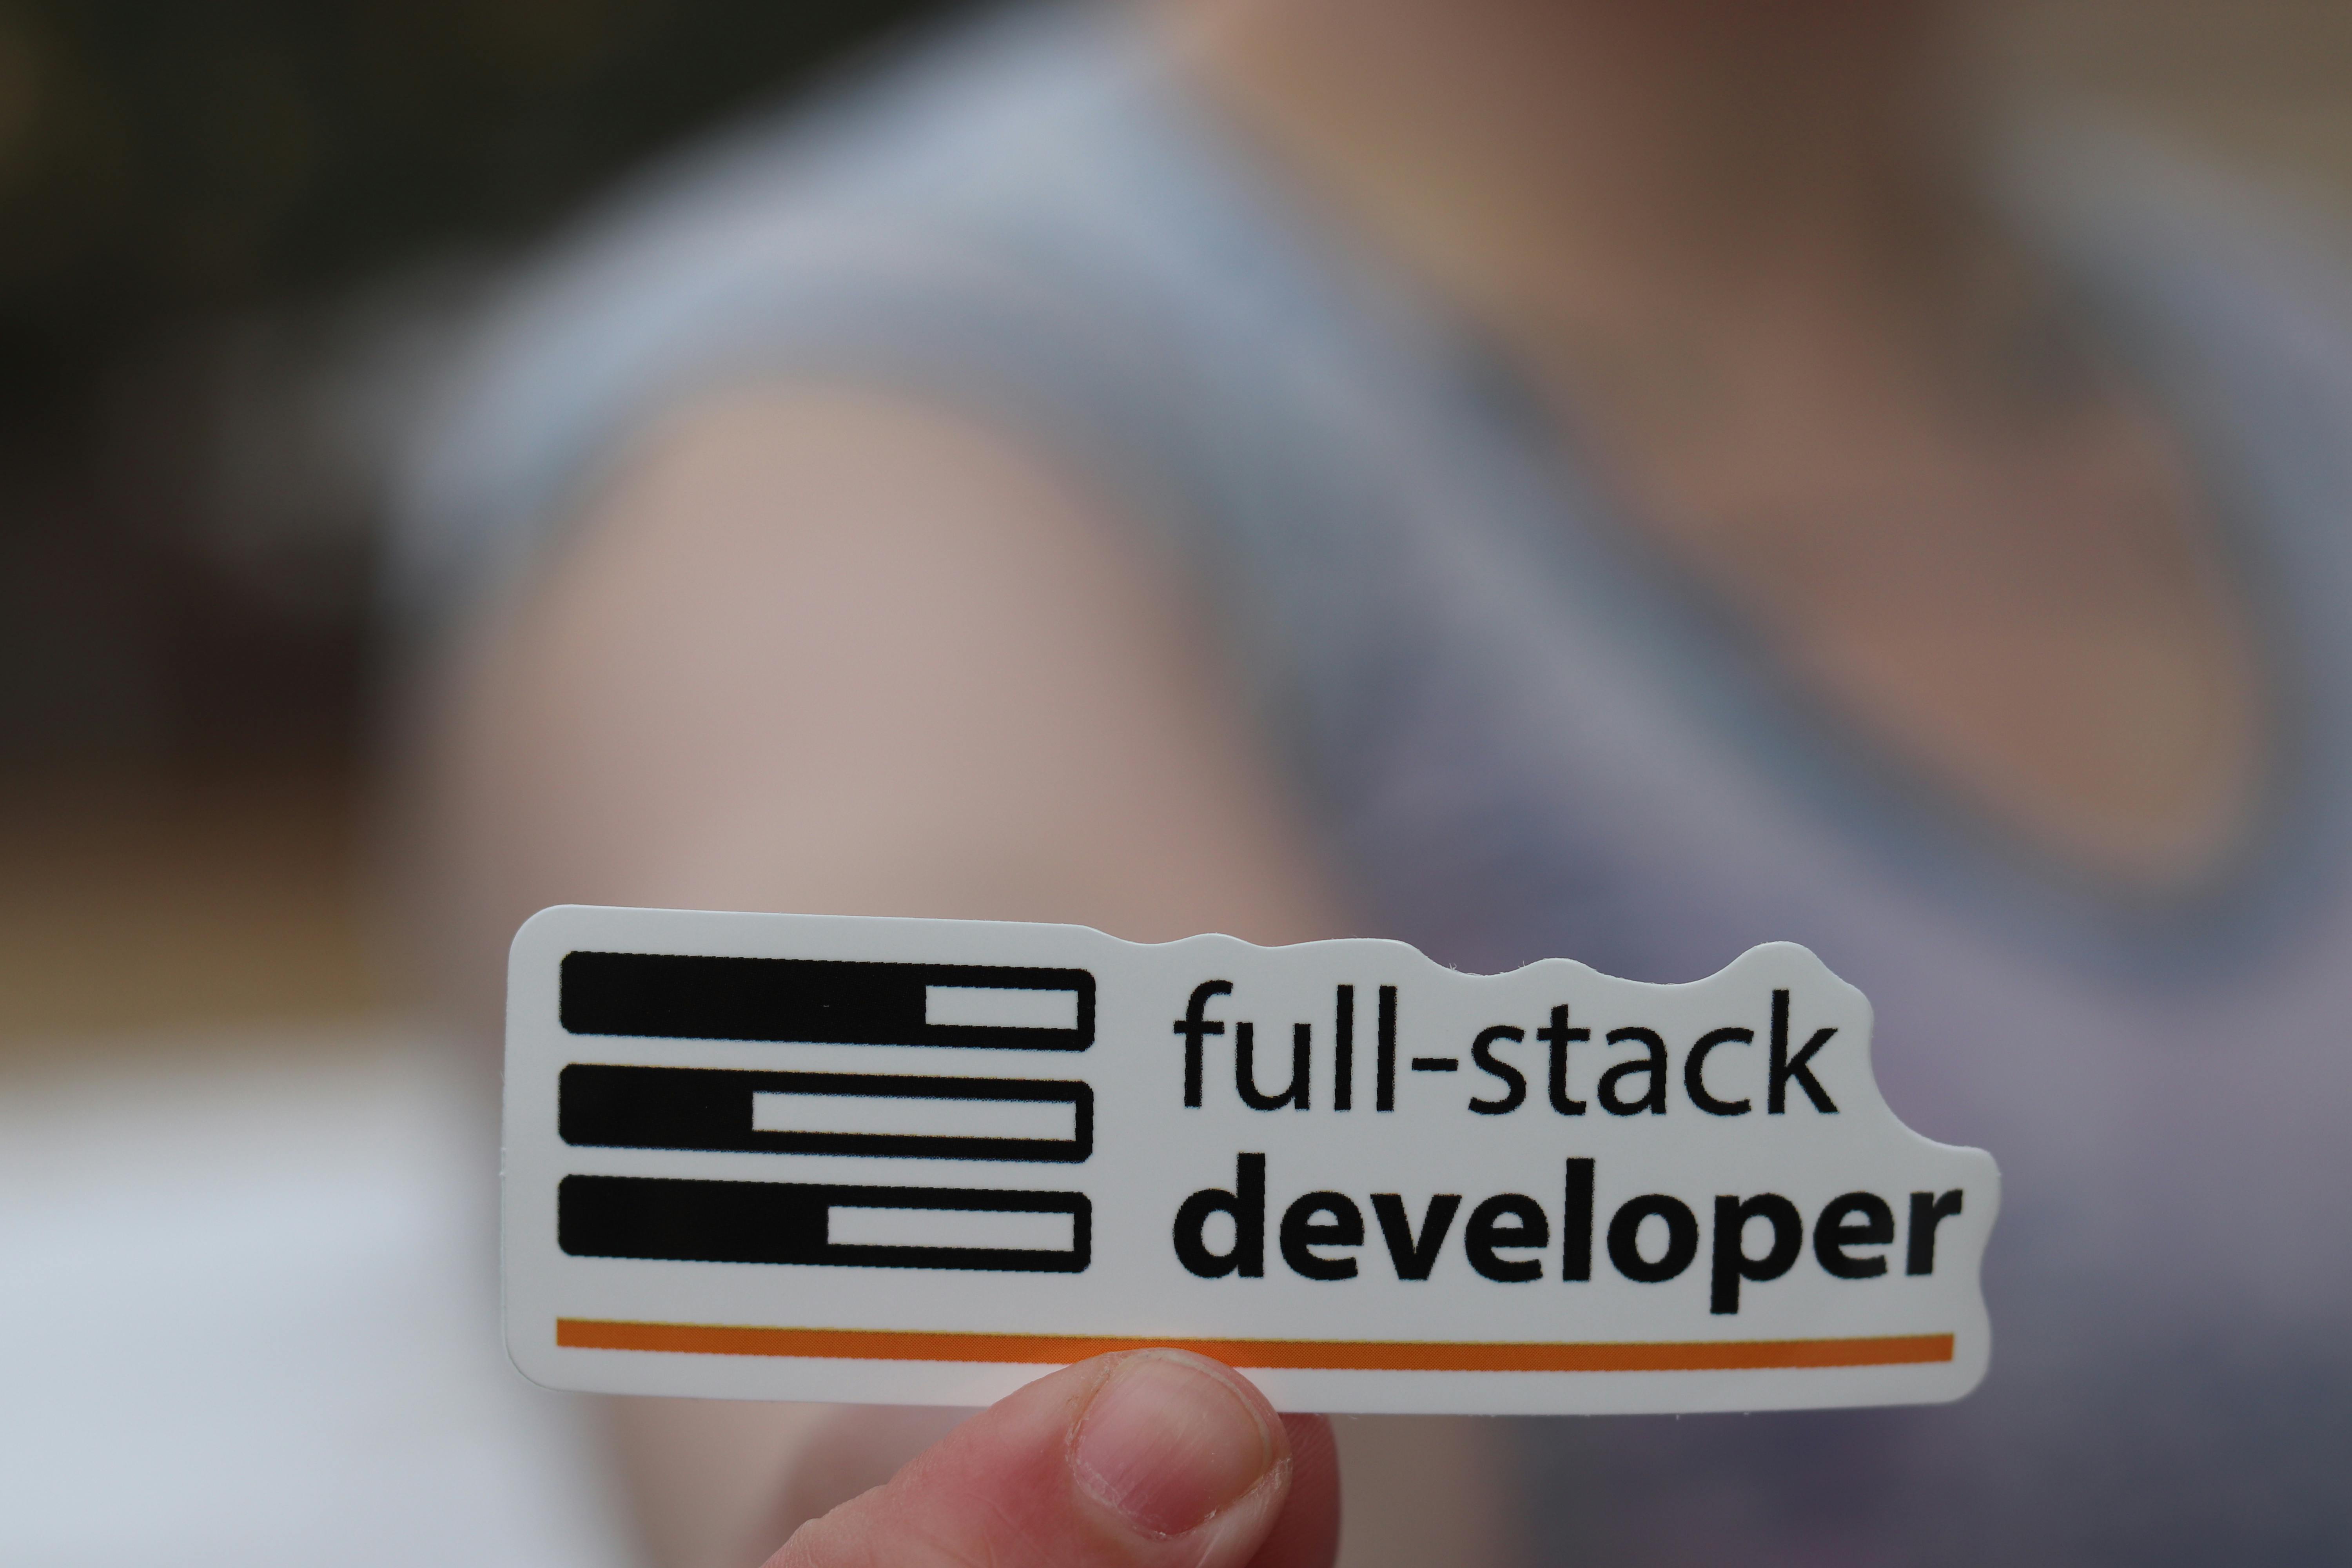 7,020 Full Stack Developer Illustrations - Free in SVG, PNG, EPS - IconScout